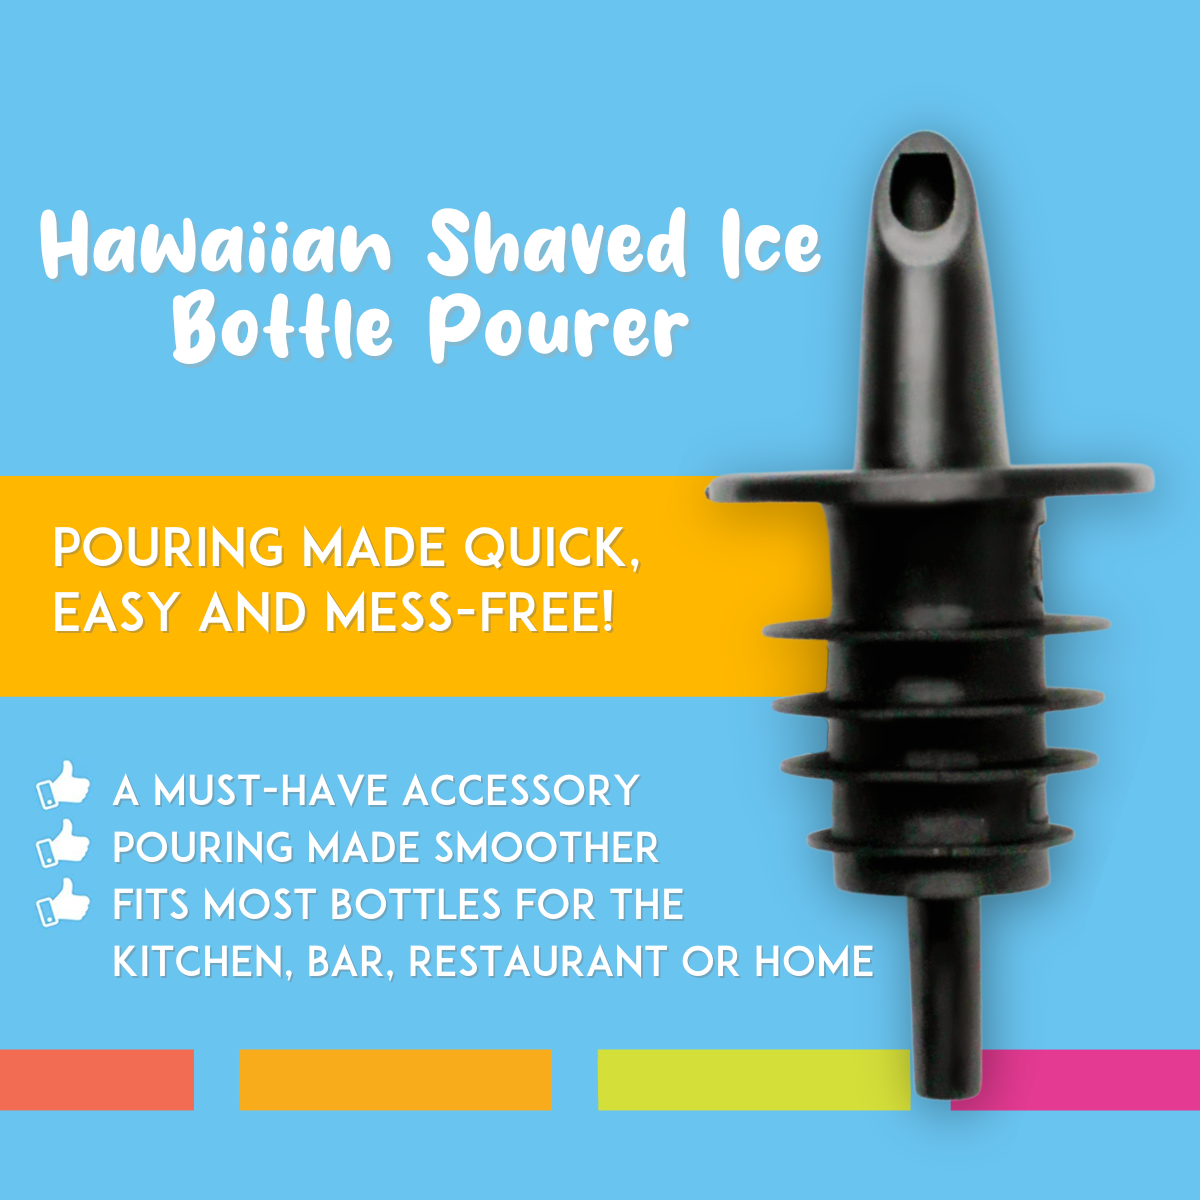 Front facing image of bottle pourer. The text to the left reads: "Hawaiian Shaved Ice Bottle Pourer. Pouring and quick, easy and mess-free! A must-have pouring accessory. Pouring made smoother. Fits most bottles for the kitchen, bar, restaurant or home.”